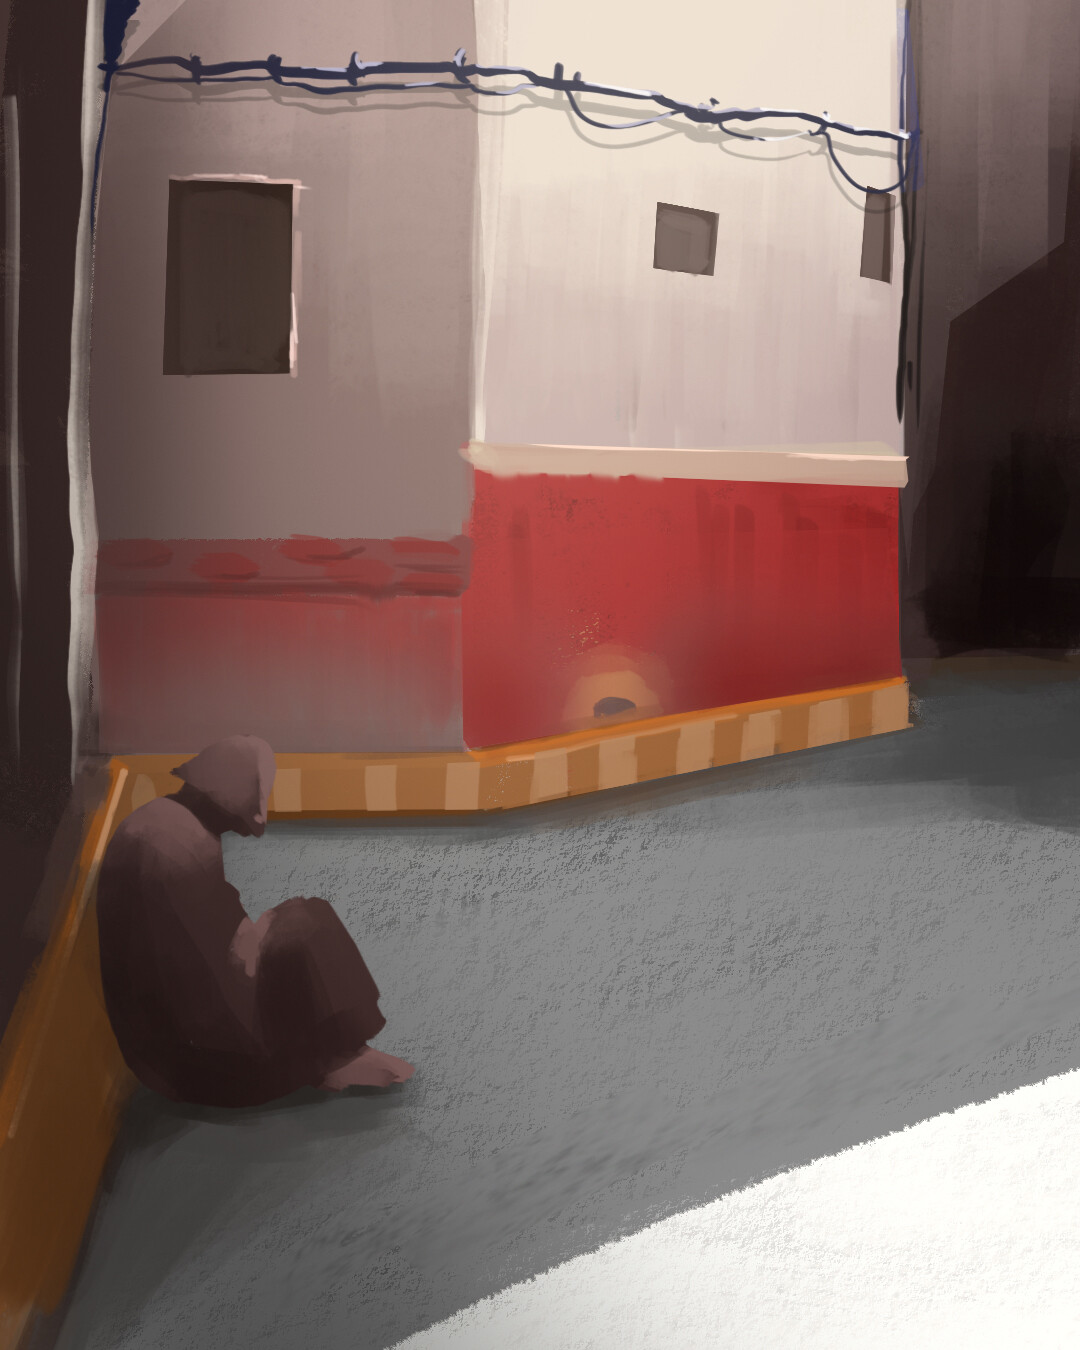 Daily 1: Man in the street. Quick photostudy